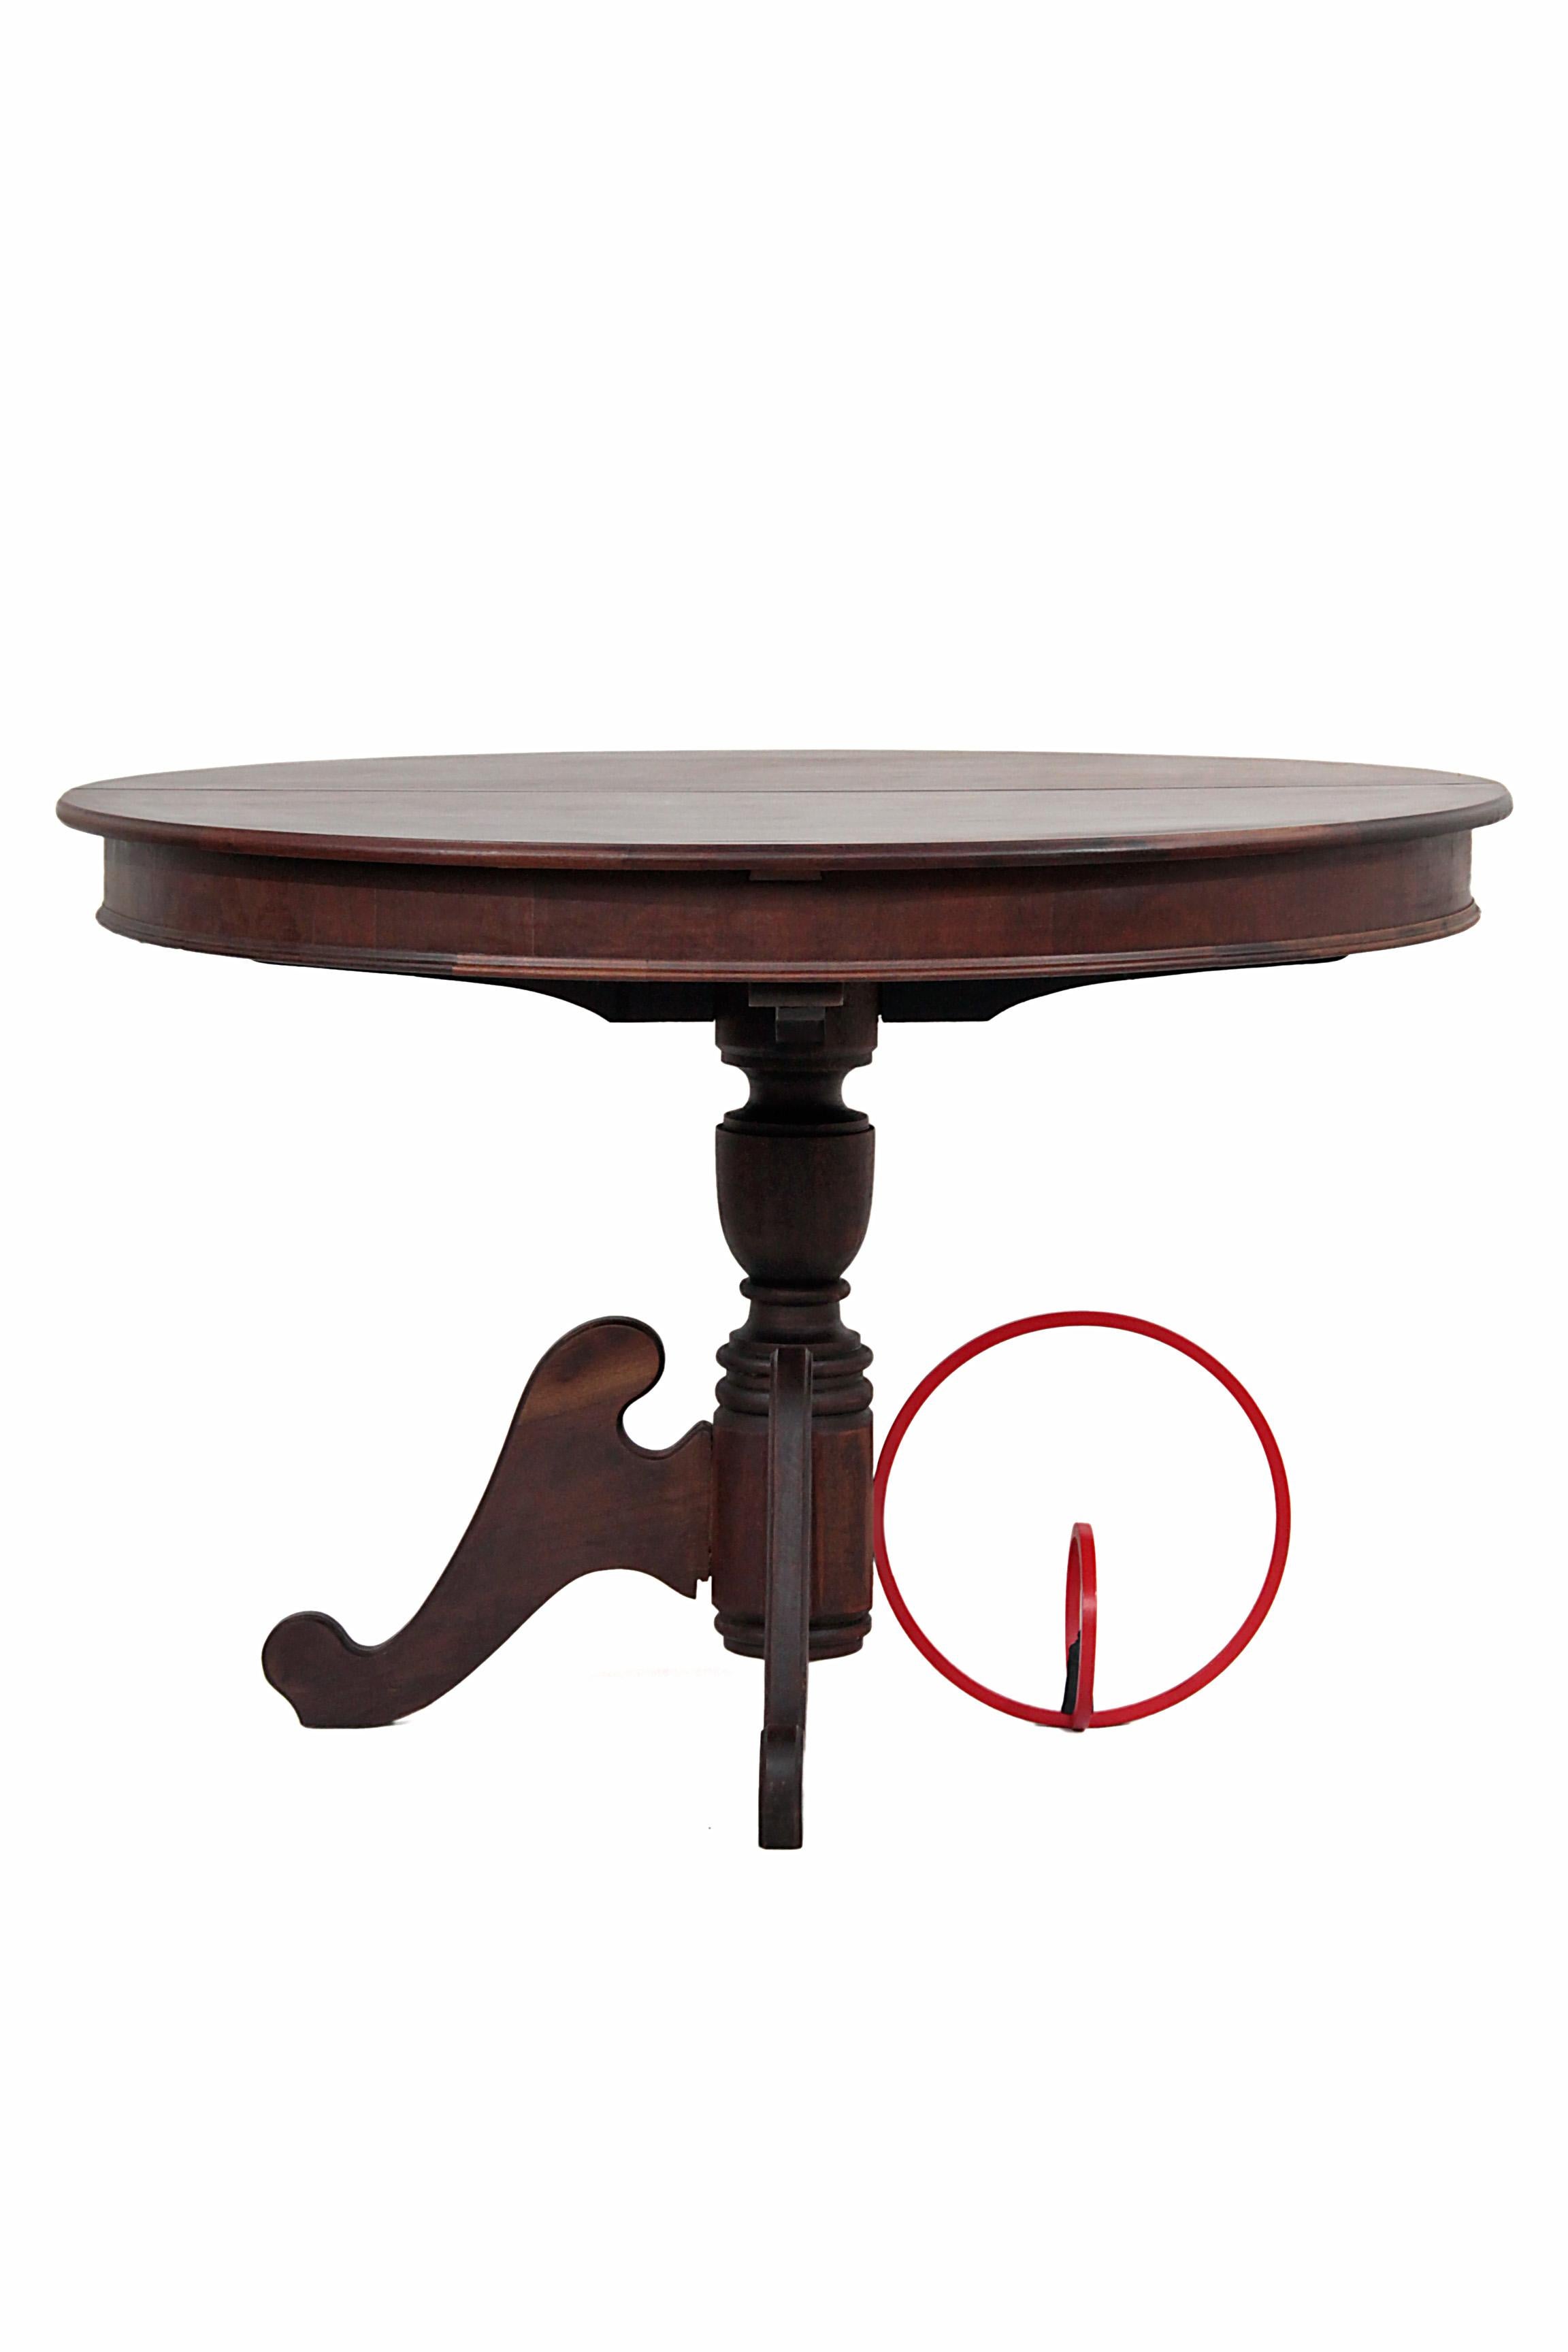 This antique contemporary wooden rounded table, Restauro #1 (restoration #1) is an antique Brazilian walnut table rescued and restored with one red painted steel rounded structure for a foot, in which is one 3D printed small statue. Since this a